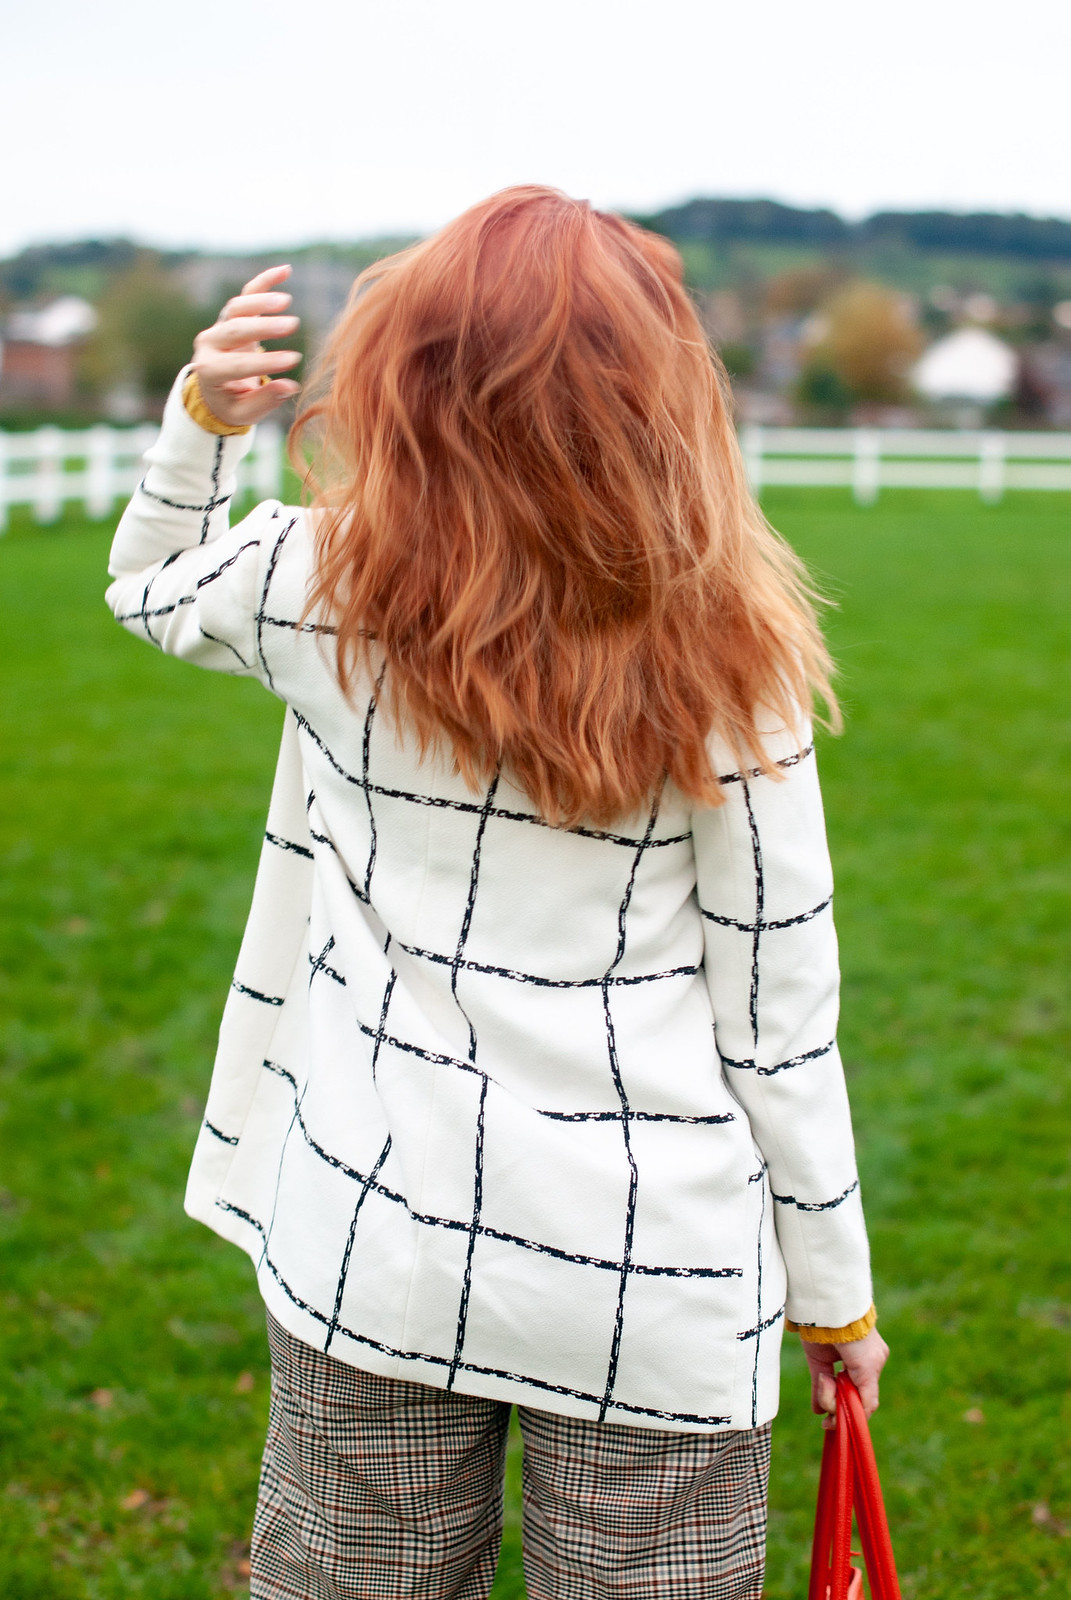 How to Mix Checks in Autumn, Over 40 Style | Not Dressed As Lamb